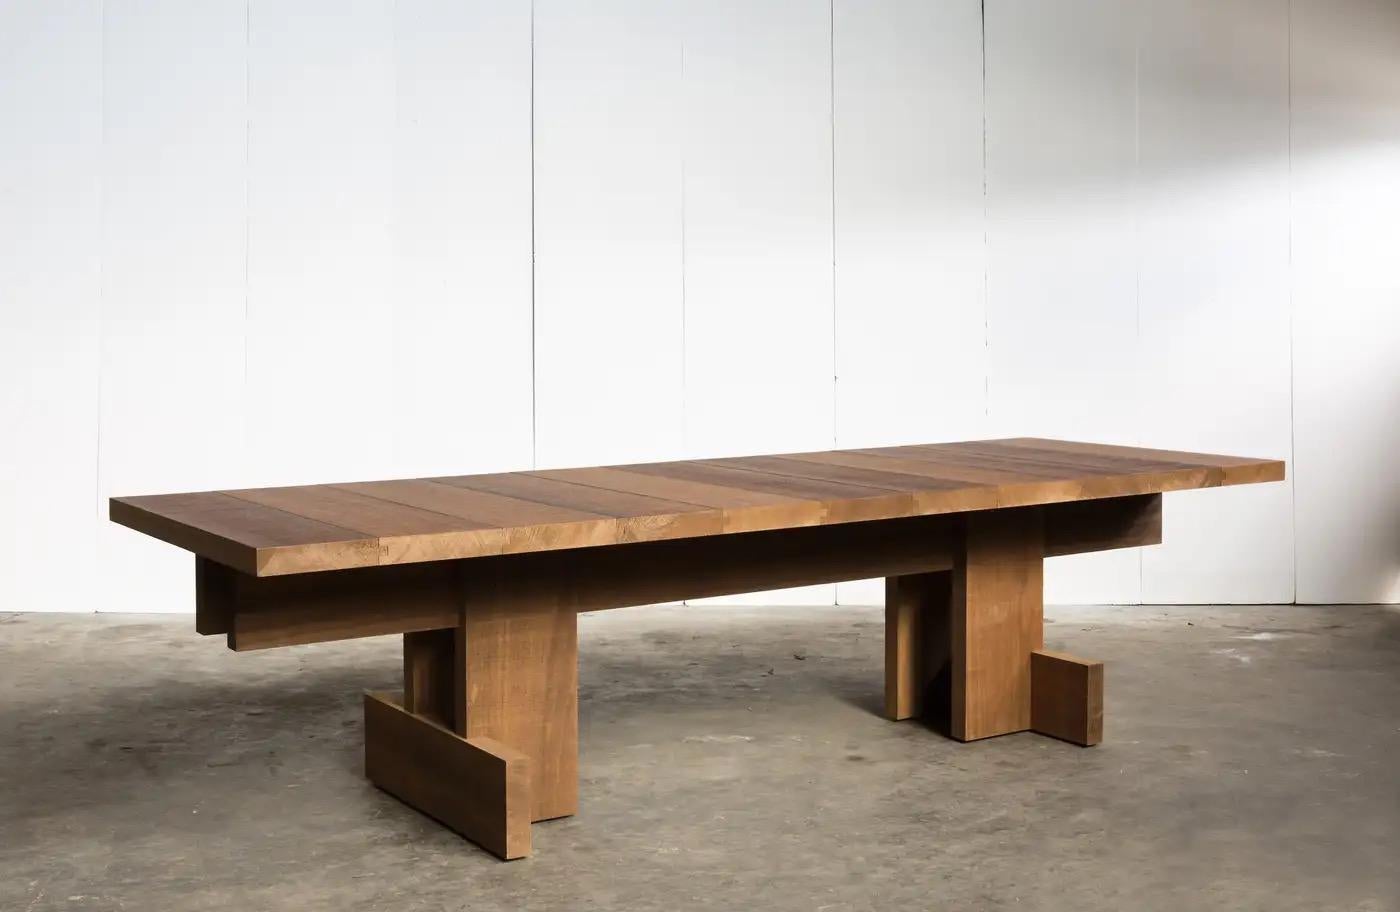 This coffee table maintains the Impressive Allure of our Belgian Made Brutalist Style Dining Table. The same charm, pure simplicity and clean edges, leaving room for appreciating the strong and natural appearance of African Ayous wood. The top is